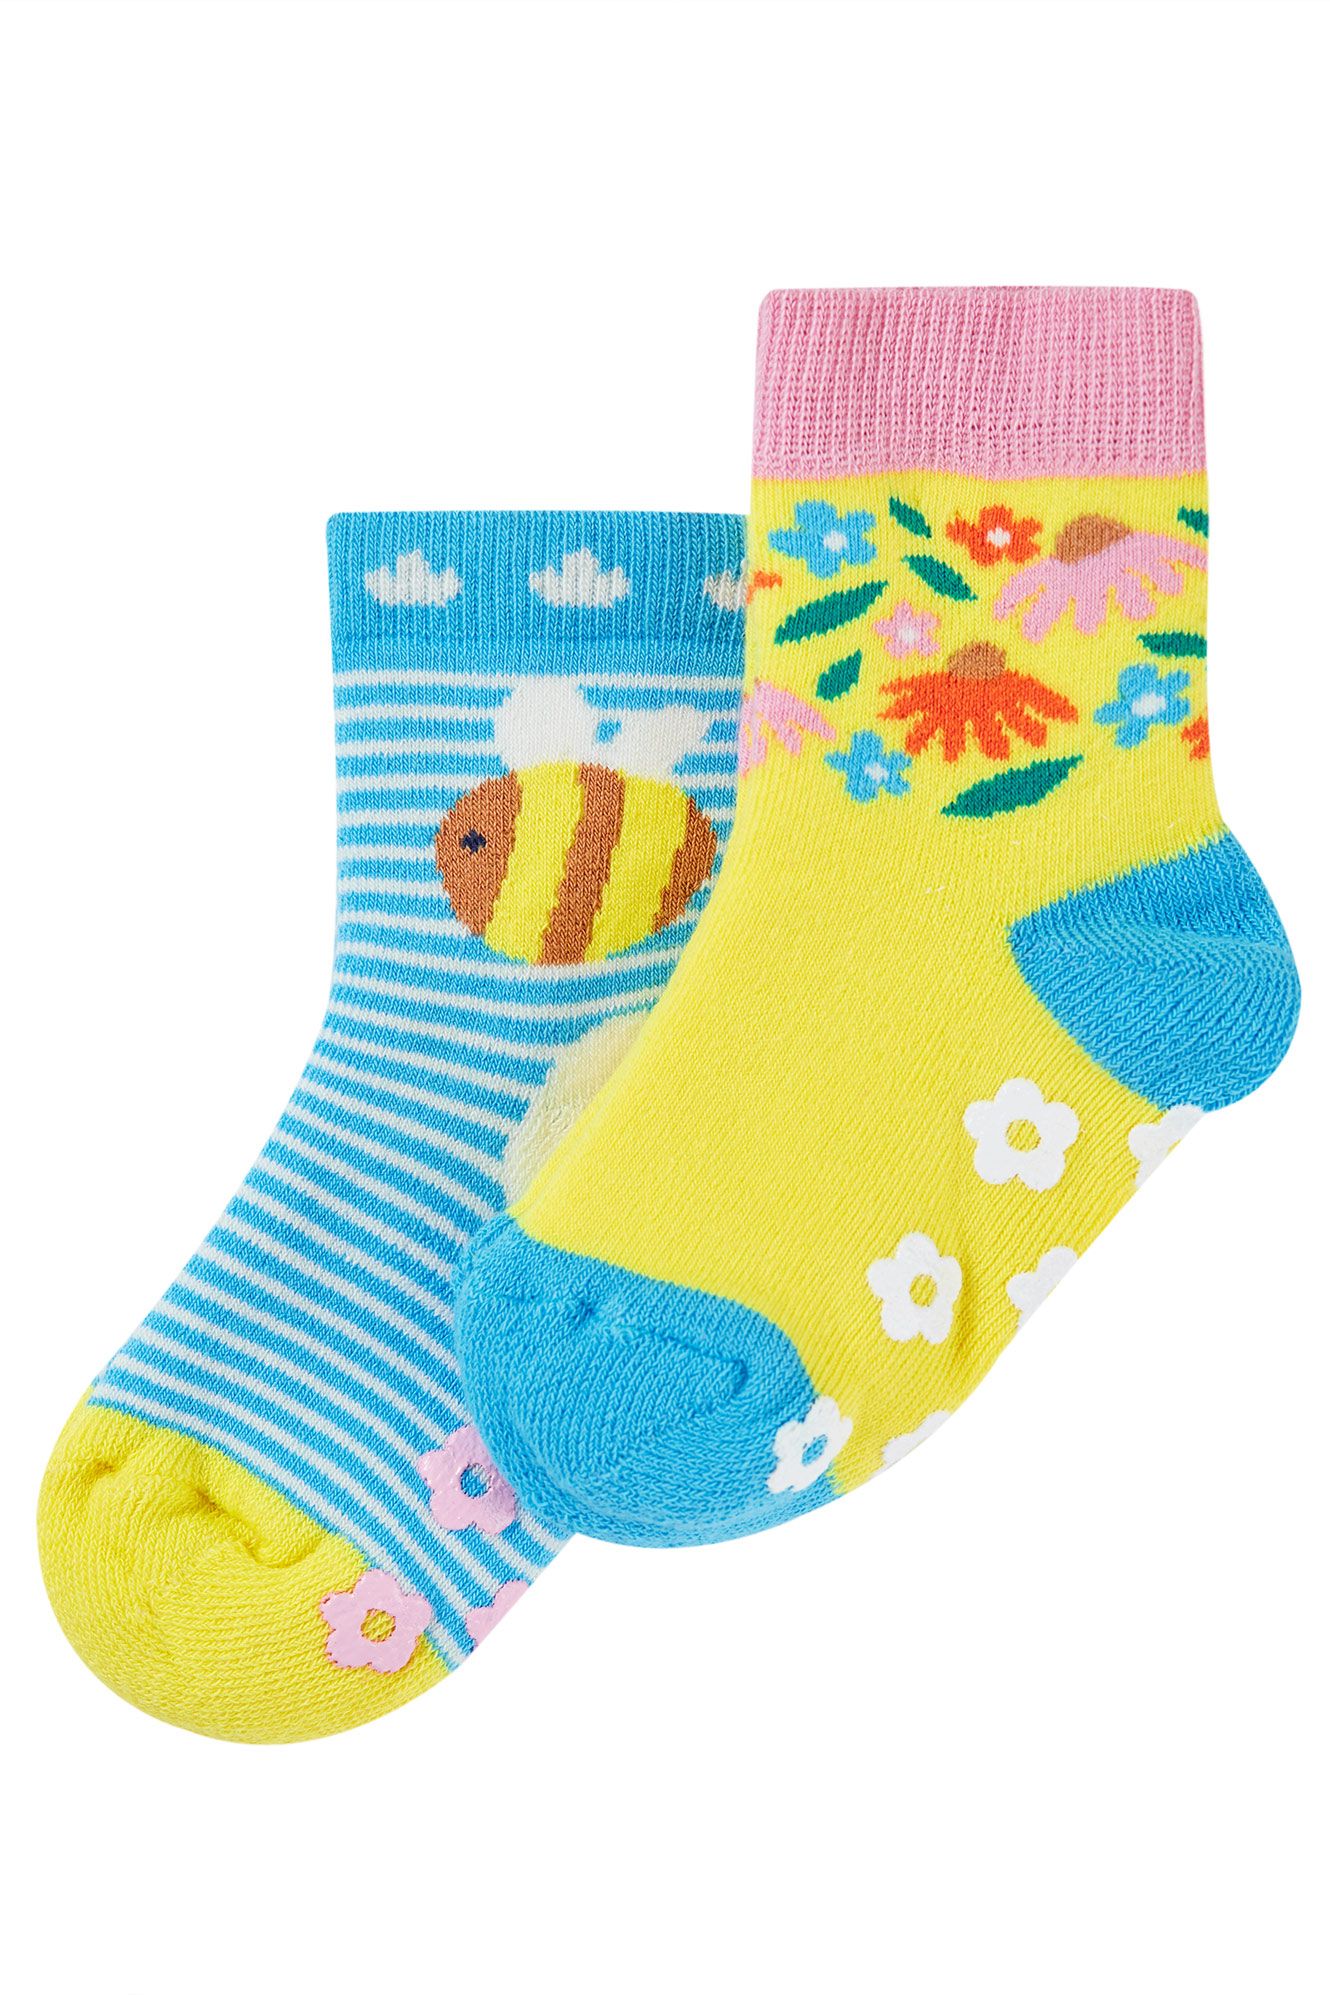 Into The Wild II: Extra Warm Toddler Socks with Grips